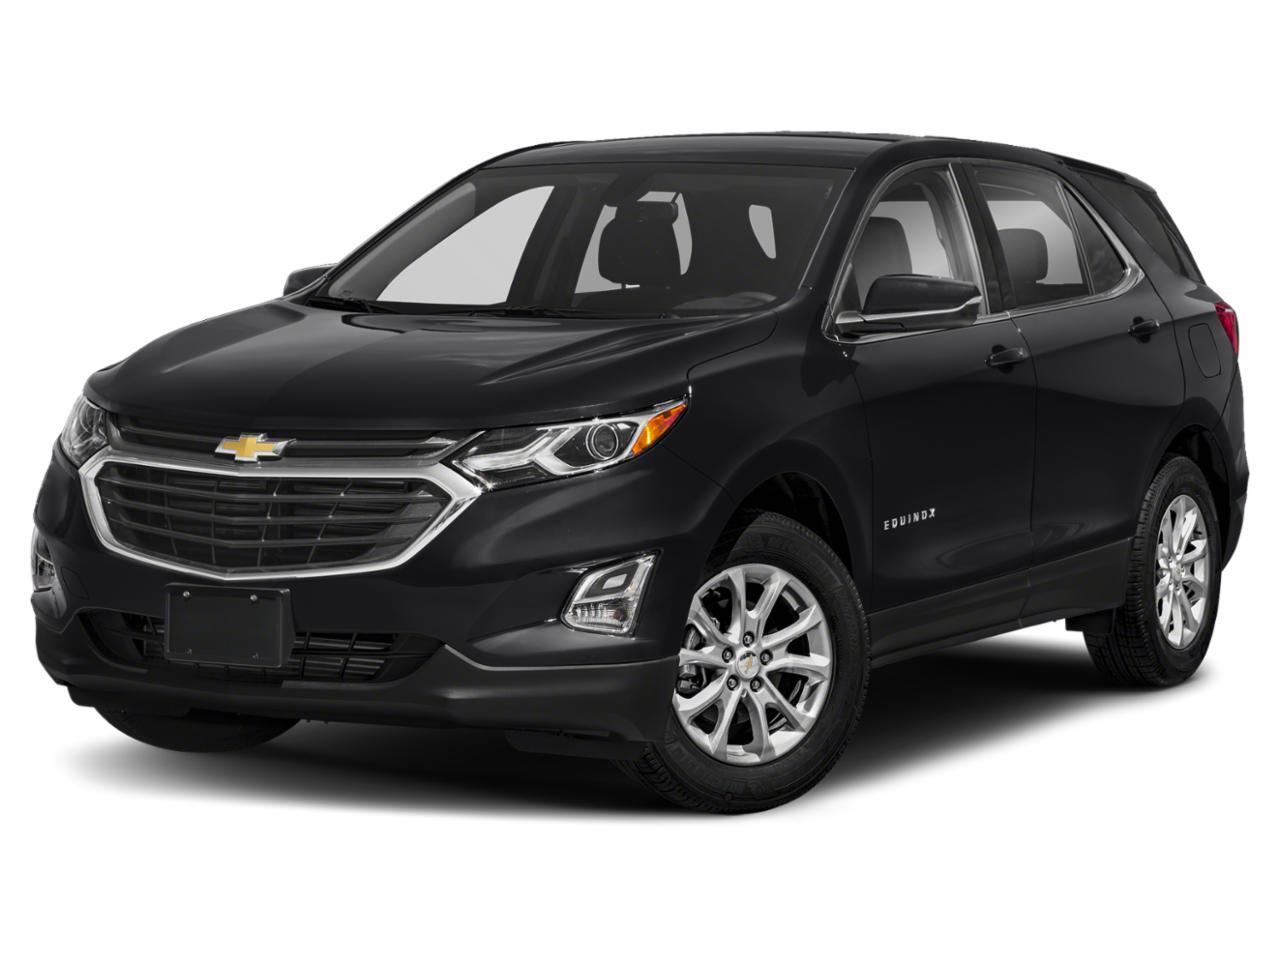 2021 Chevrolet Equinox AWD, One Owner, Great Shape